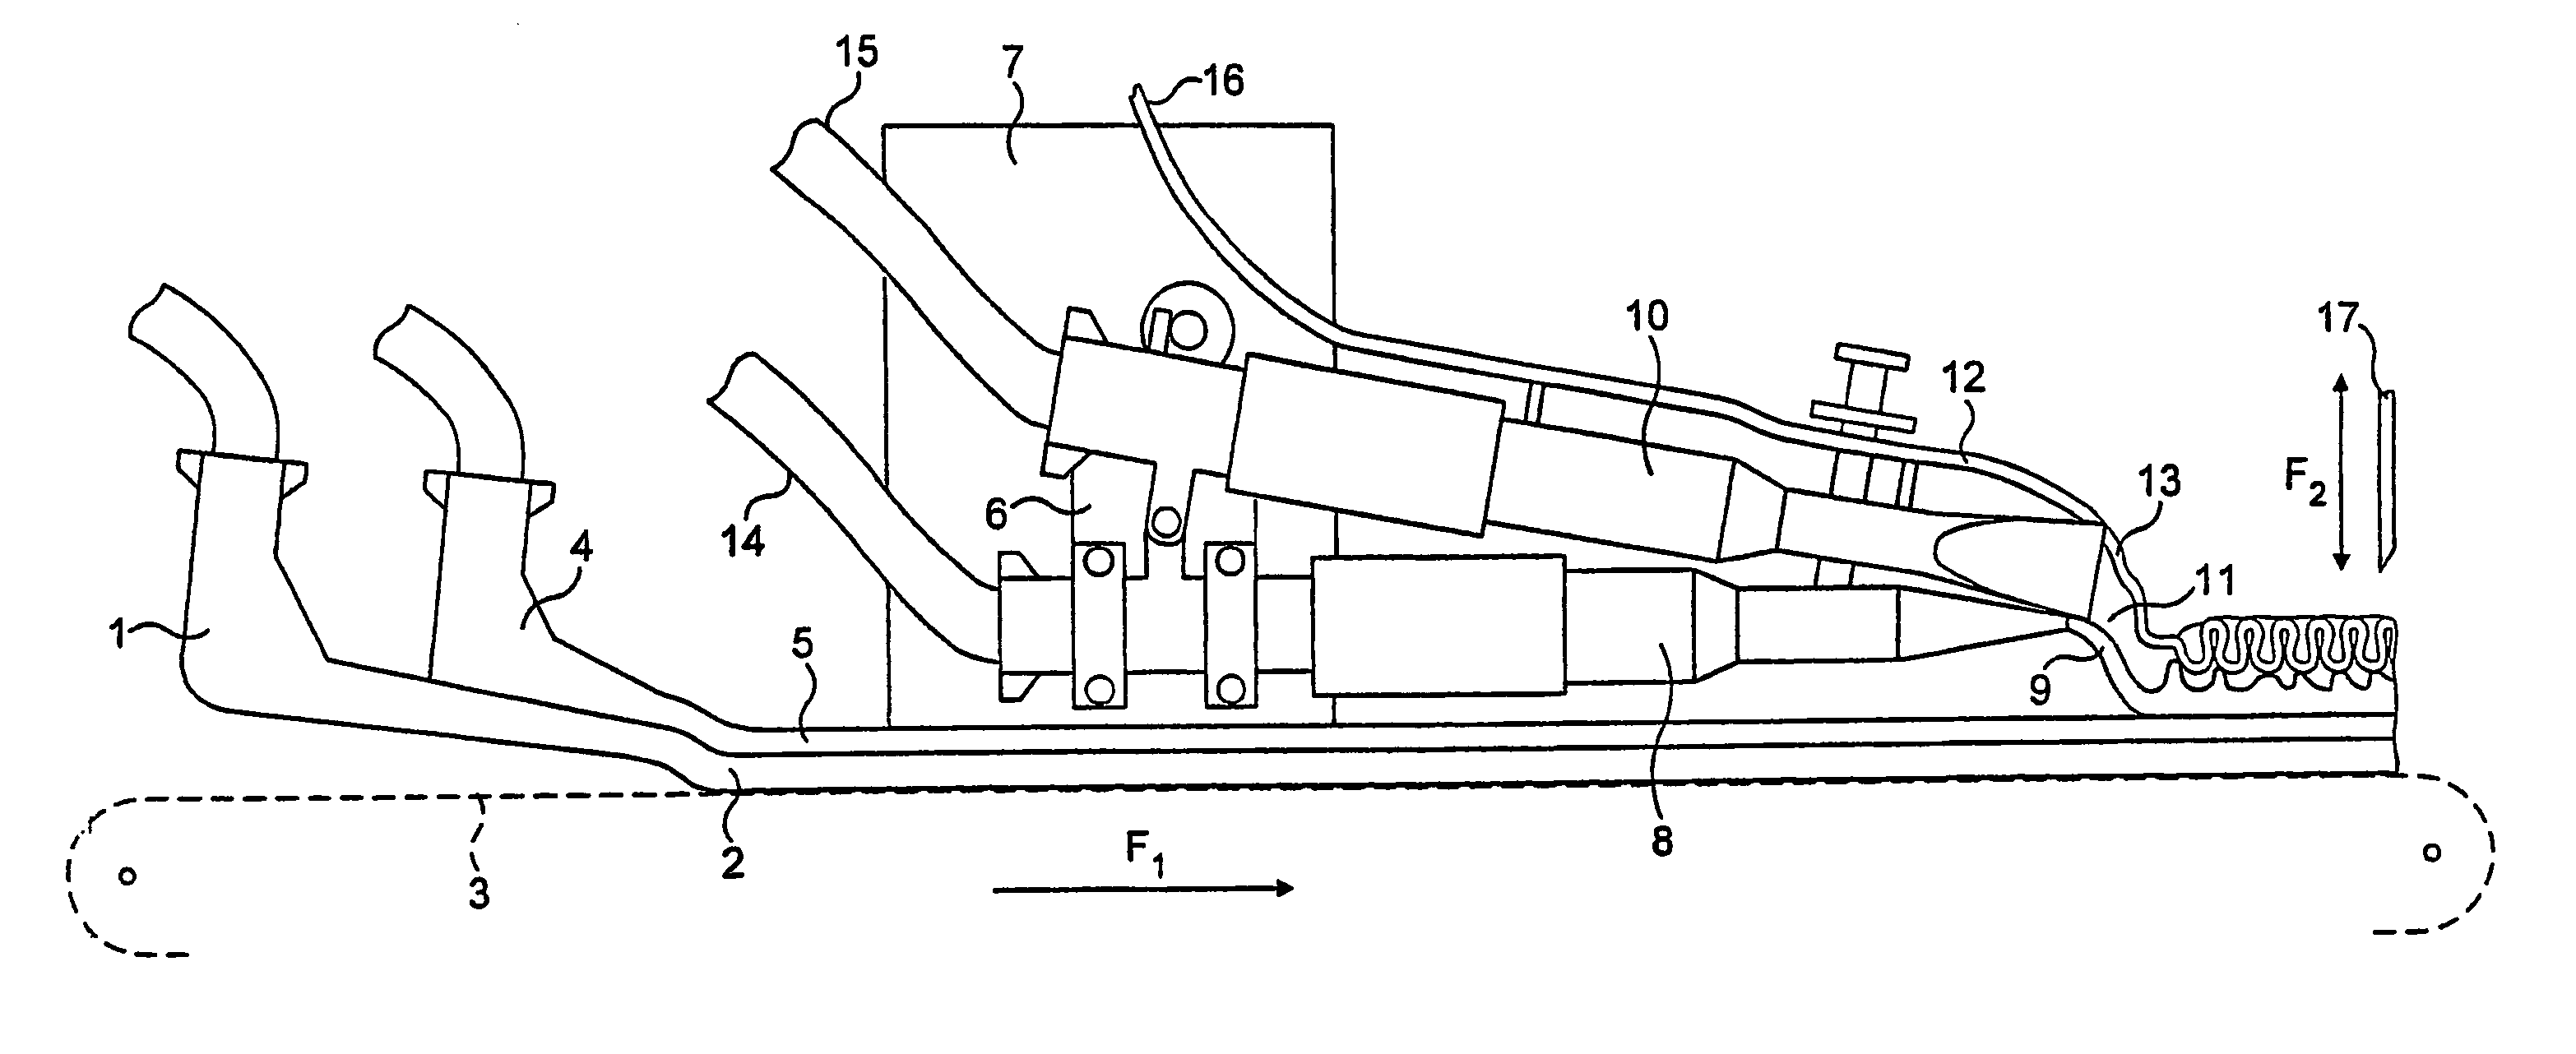 Method and apparatus for manufacturing decorated ice cream confectionery items